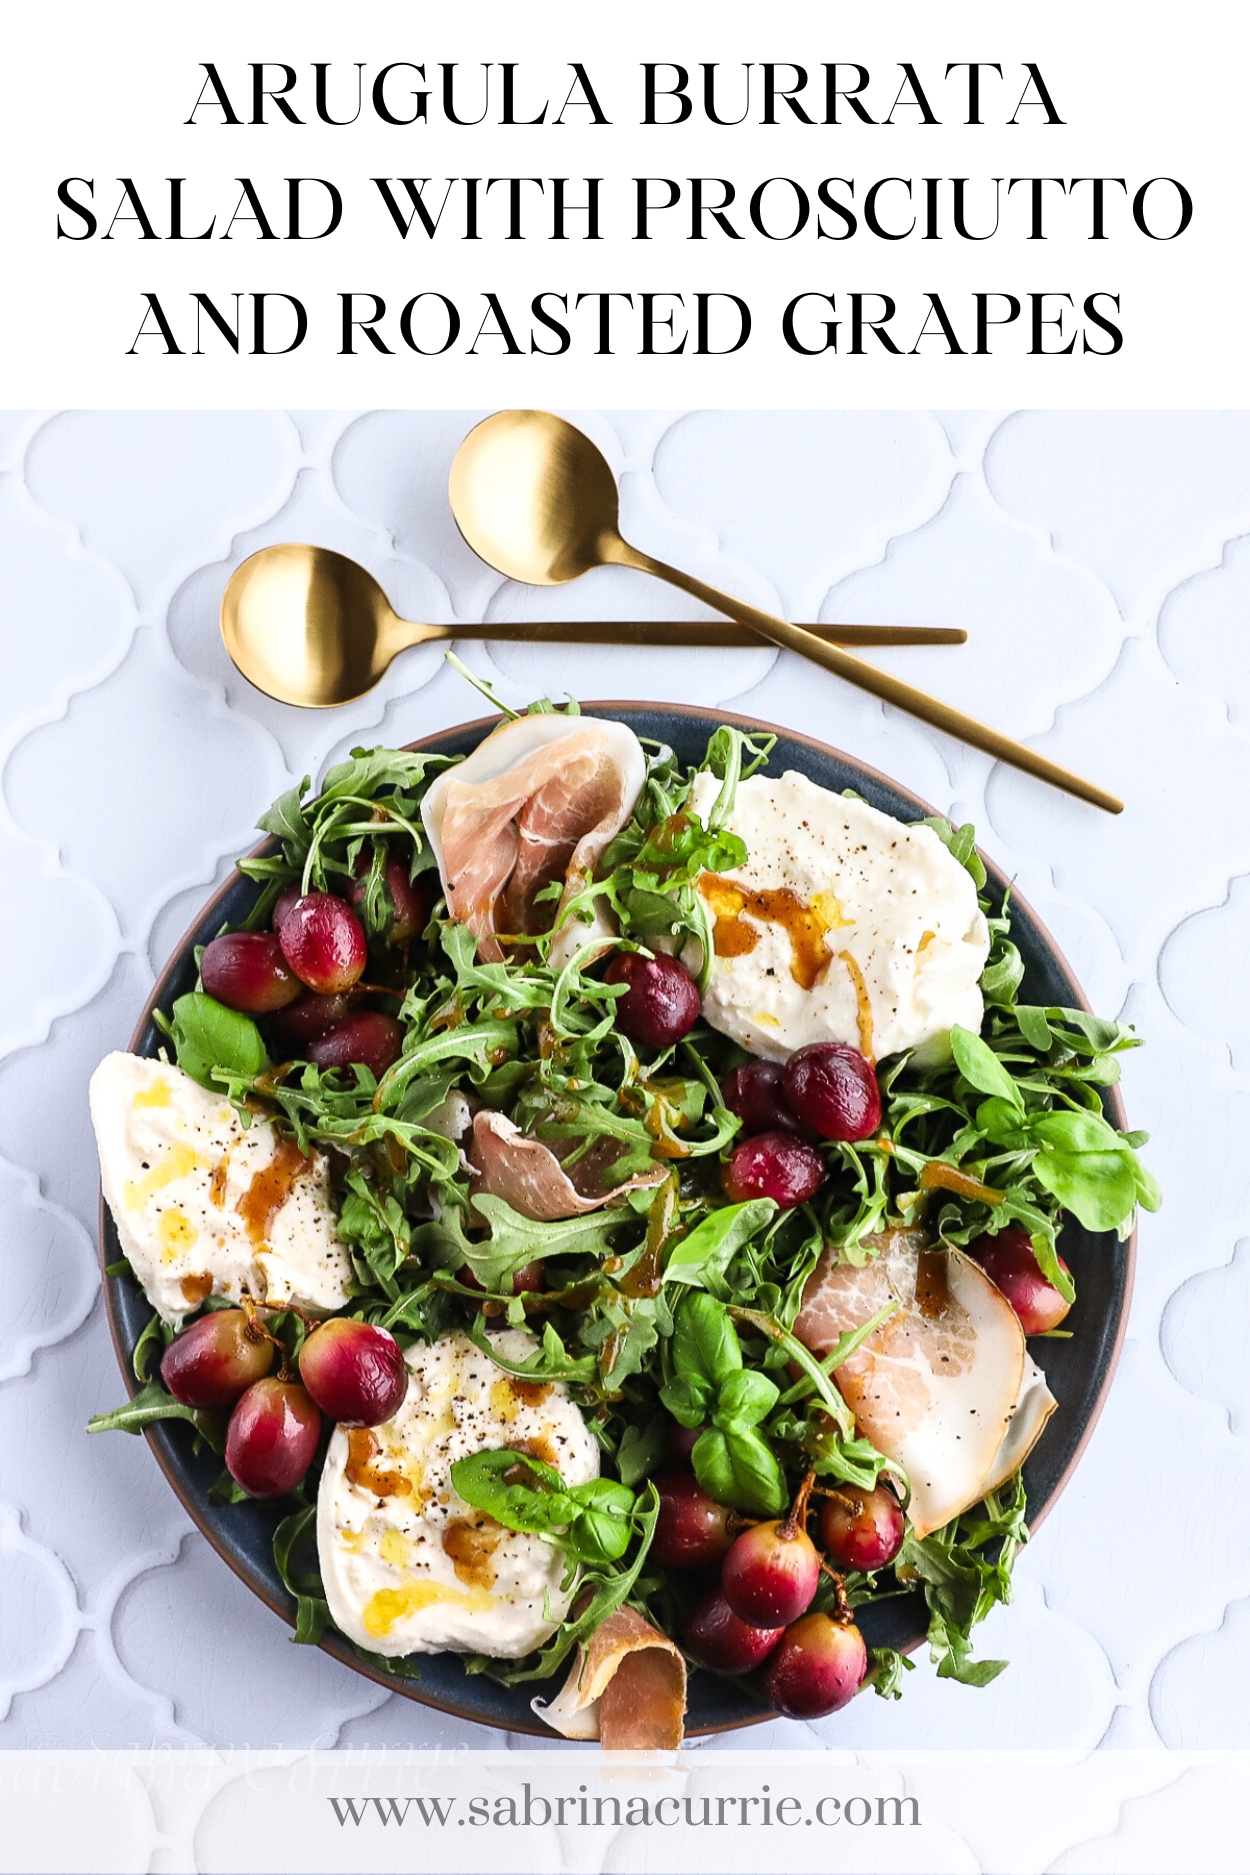 A round plate of green arugula, chunks of white burrata cheese, roasted purple grapes and prosciutto. Two gold spoons are above the plate. Recipe title is at the top.